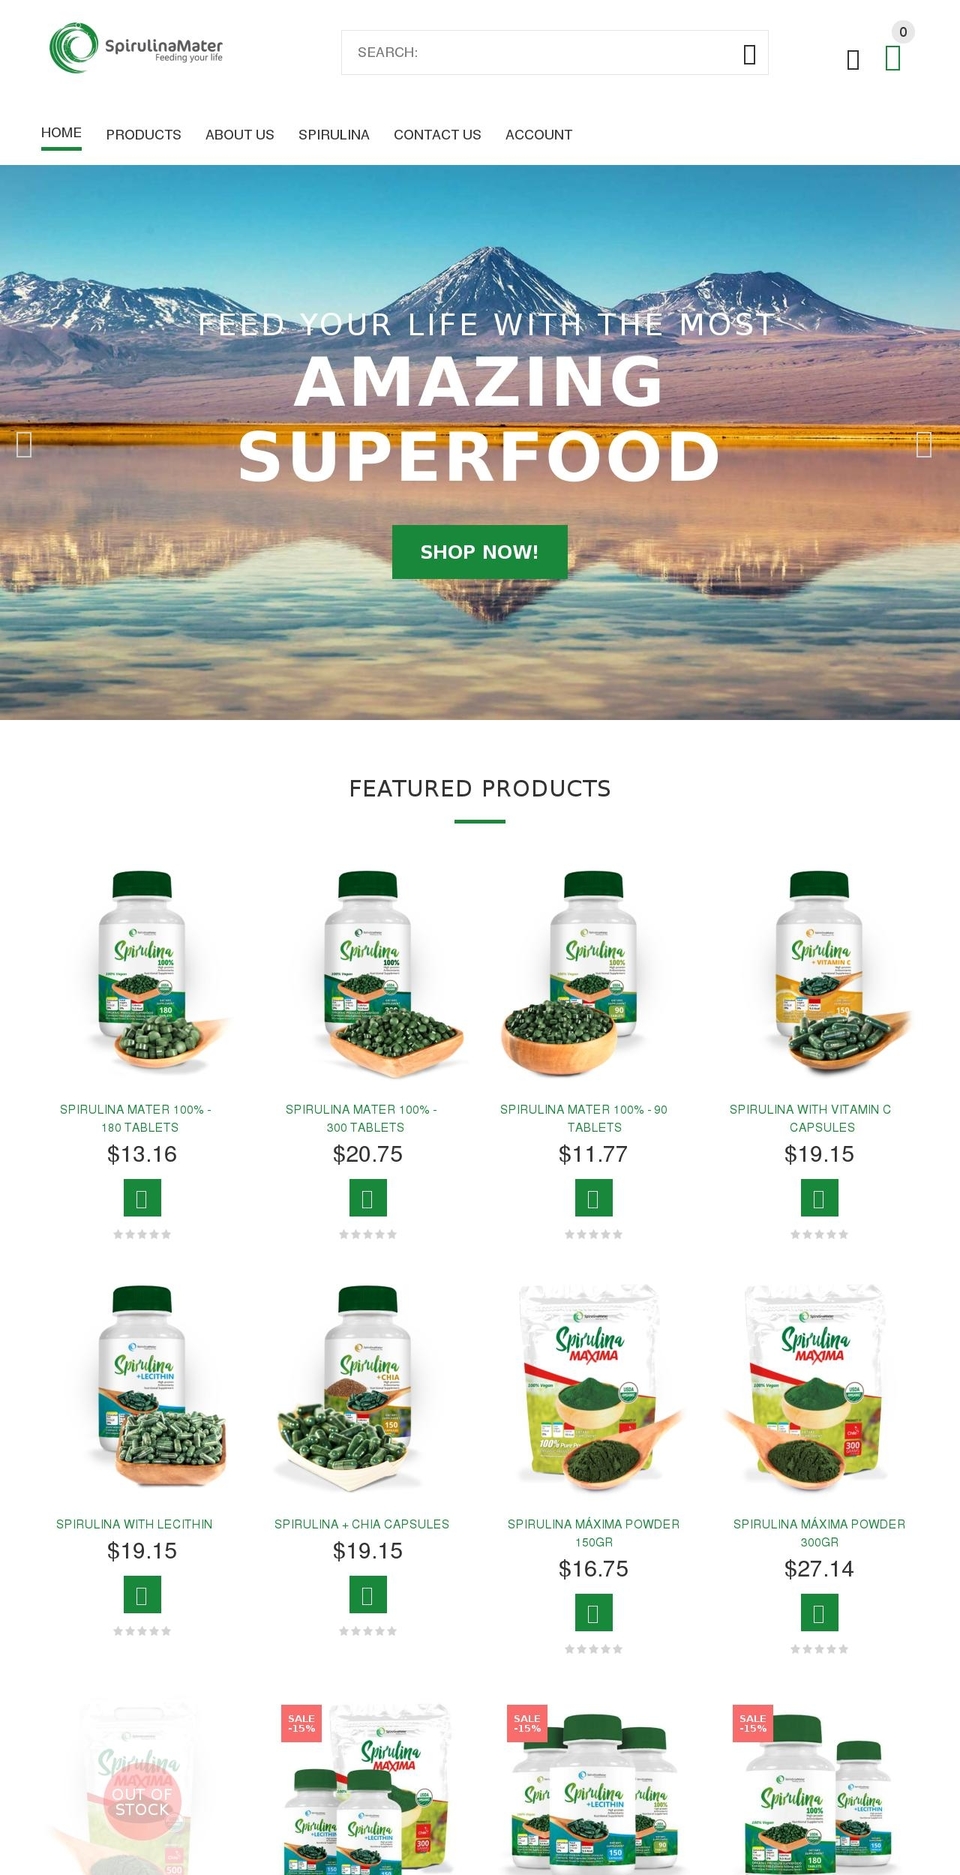 install-me-yourstore-v2-1-9 Shopify theme site example spirulinamater.com